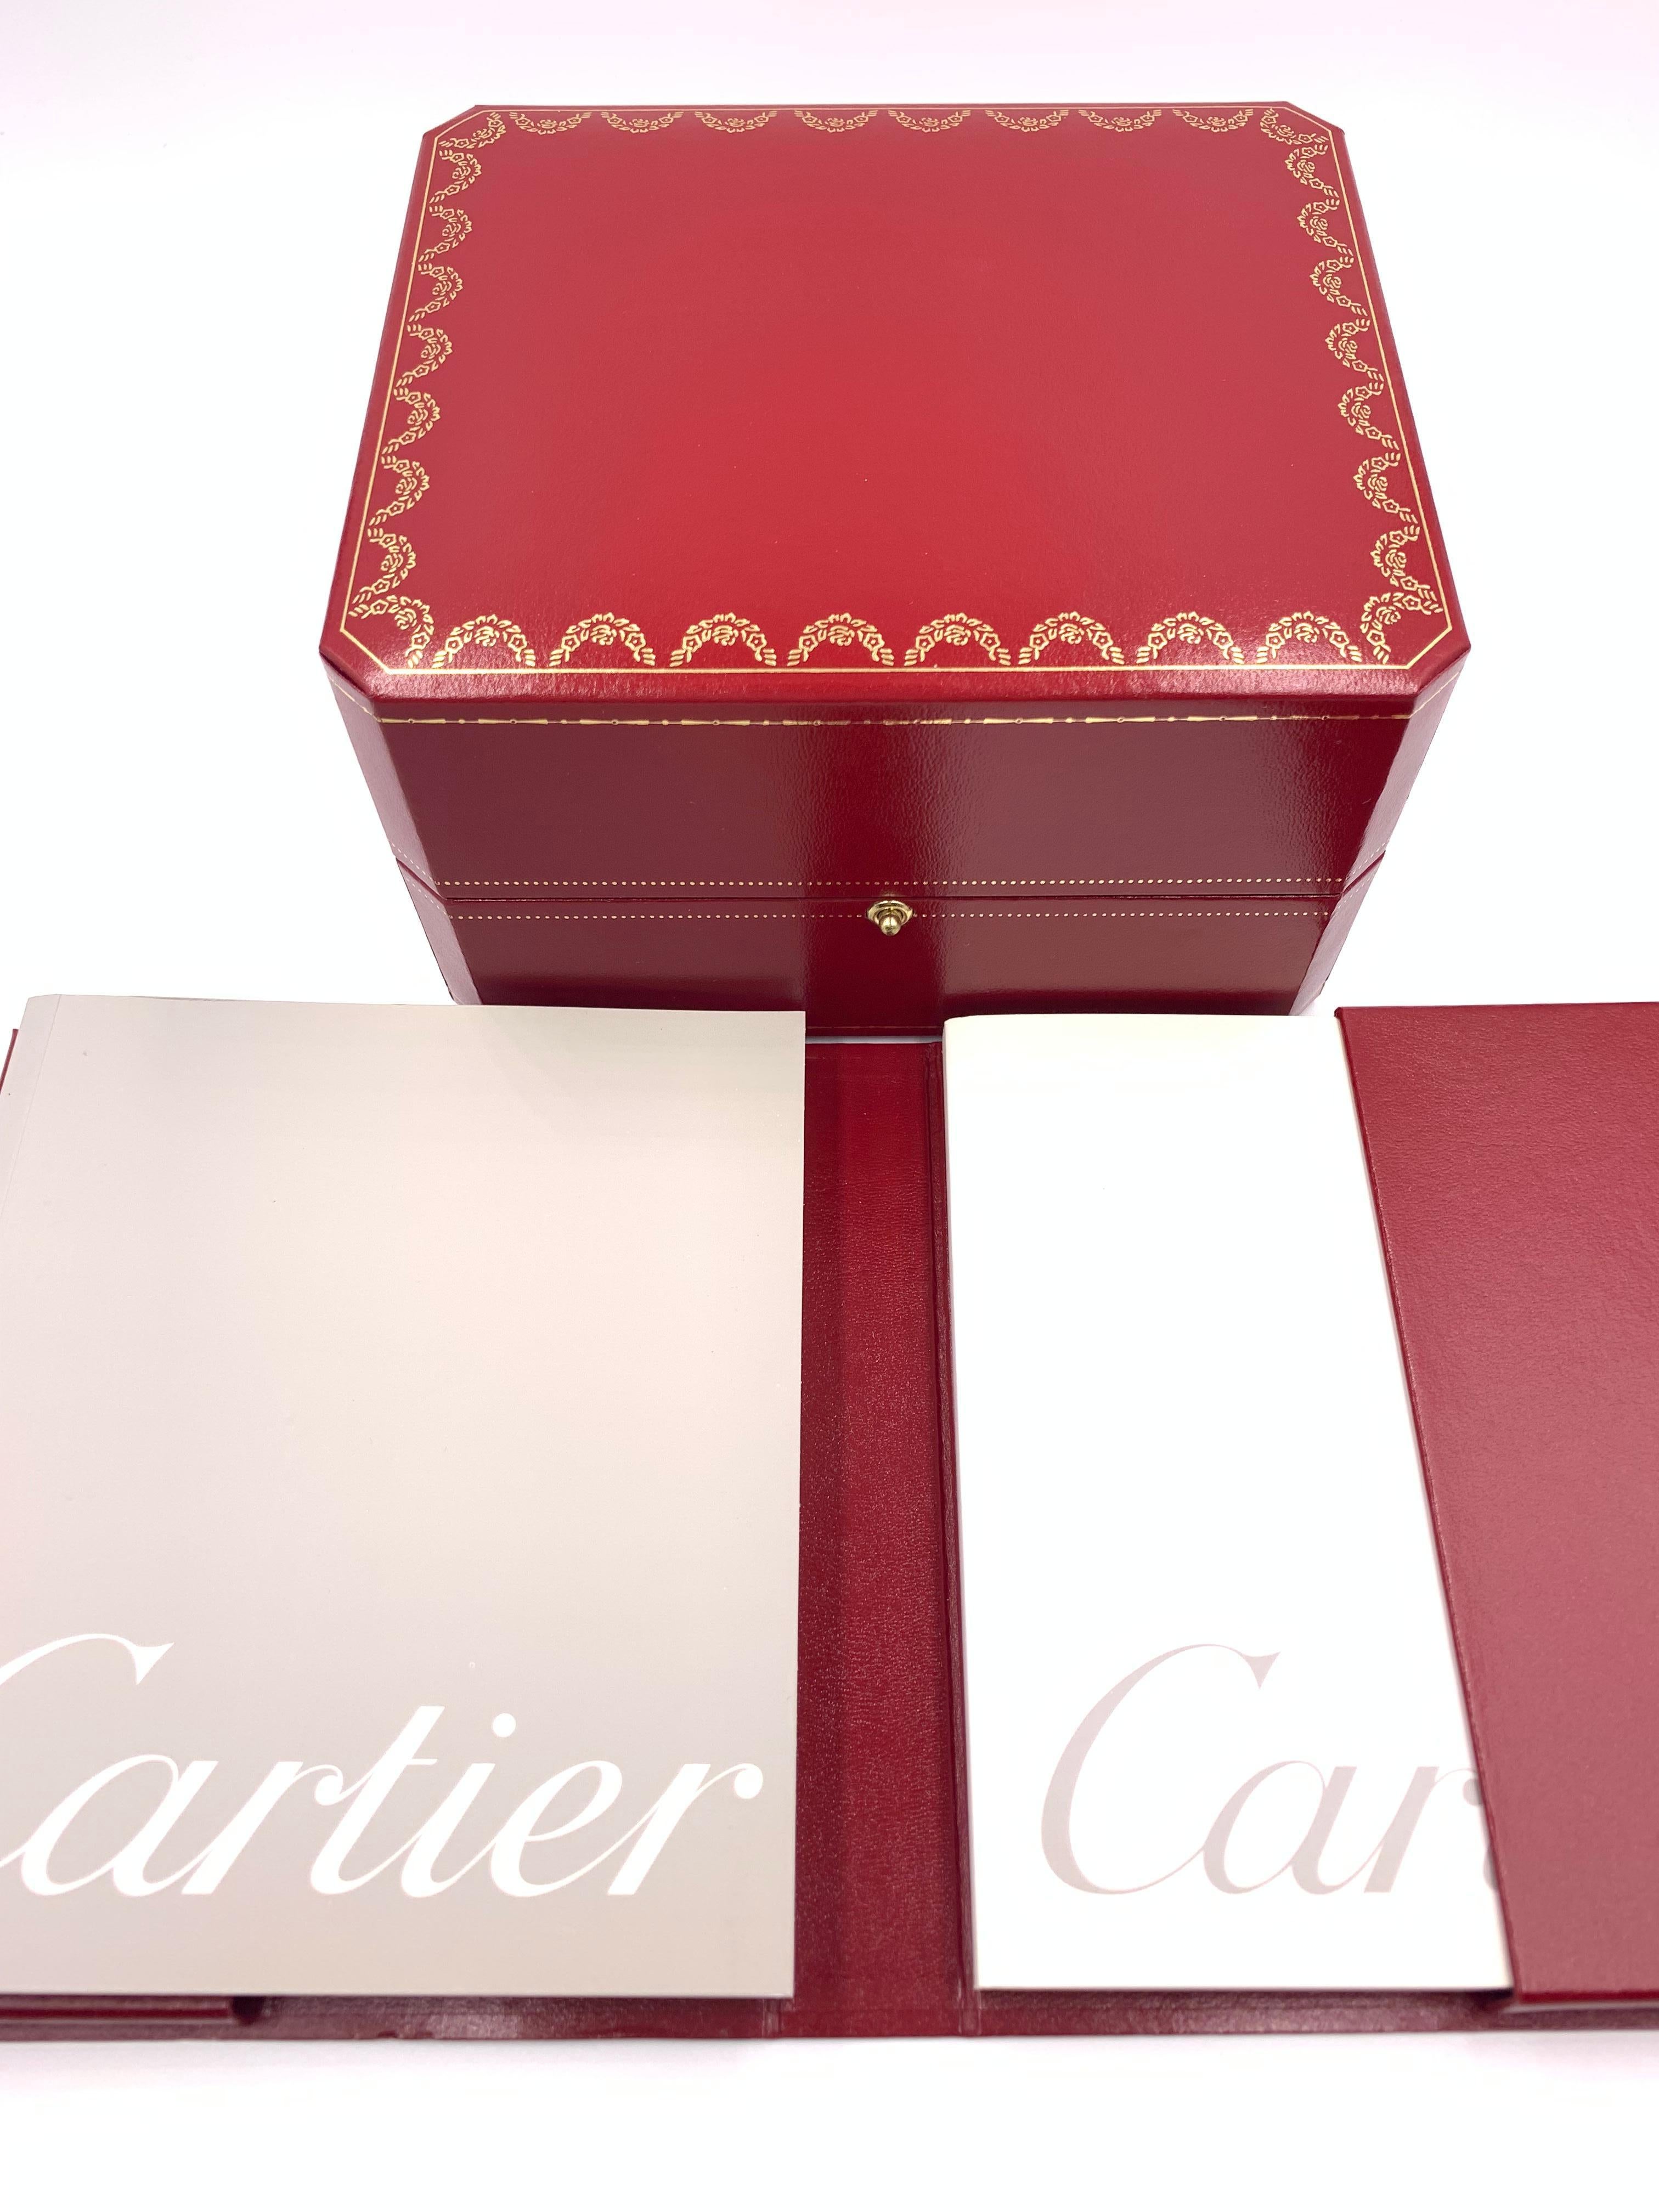 Cartier Panthere Ruban Mirrored Dial Stainless Steel Quartz Watch 2